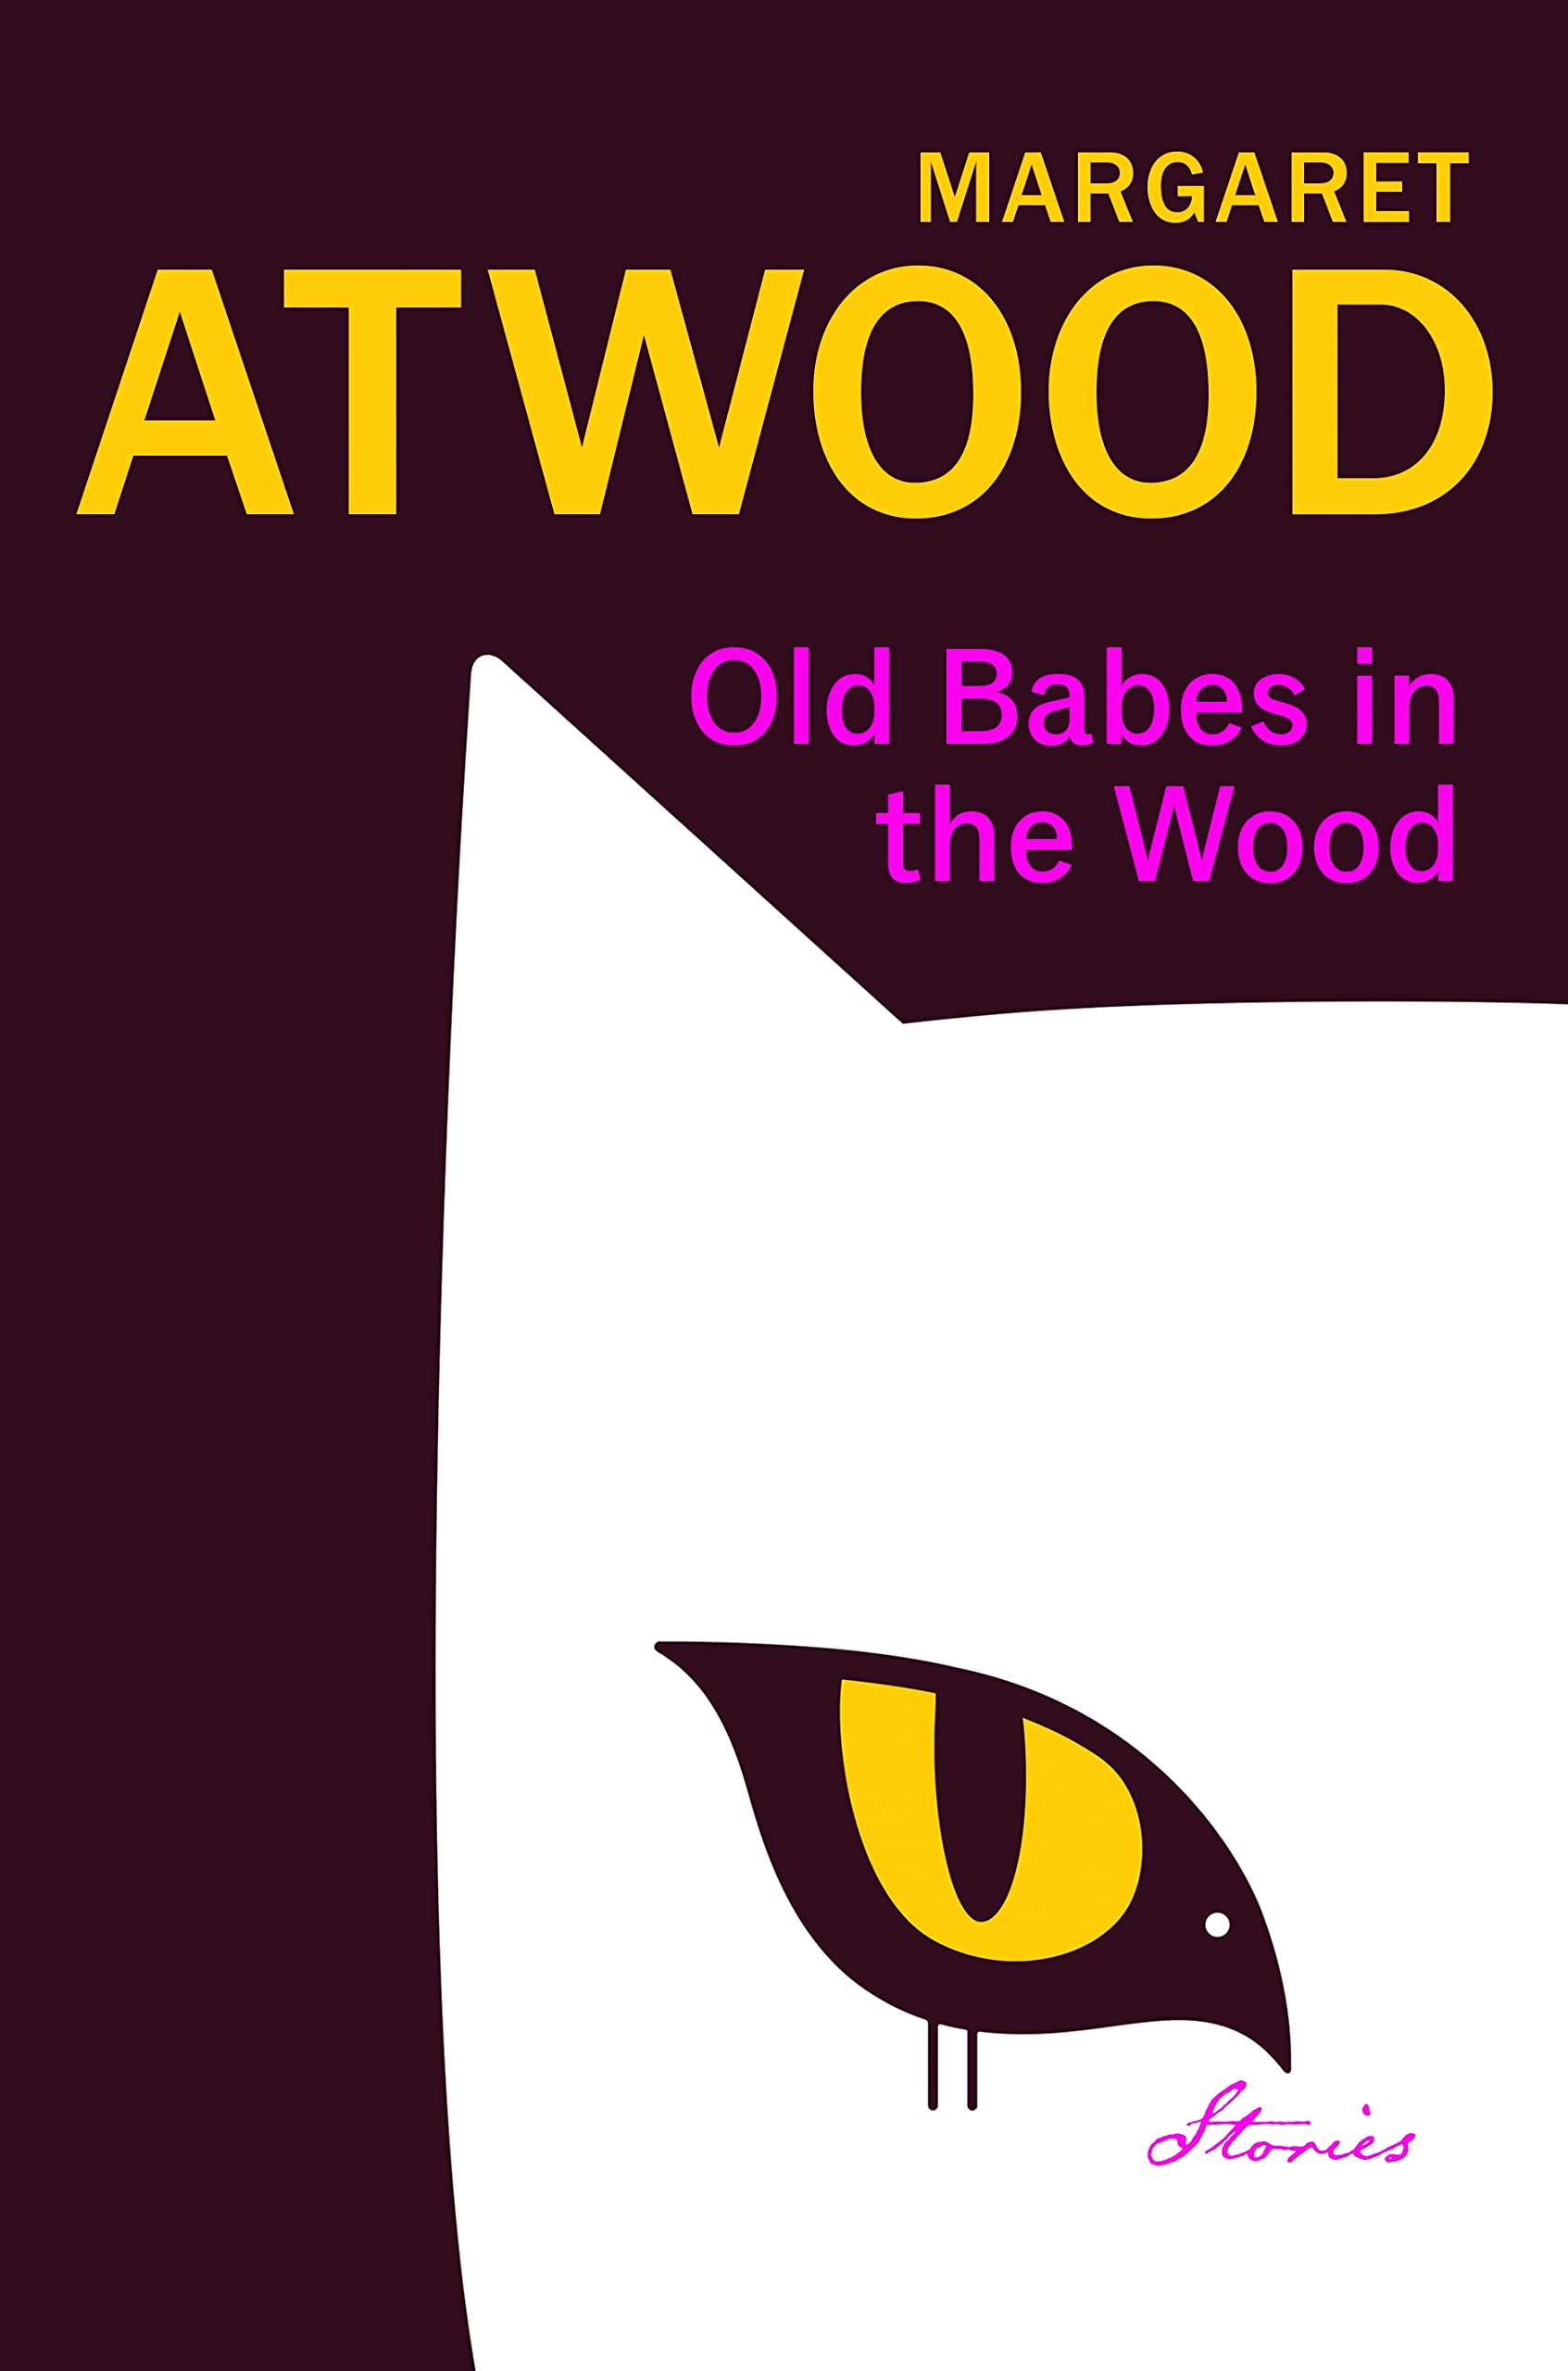 Old Babes in the Wood – The Book Lounge